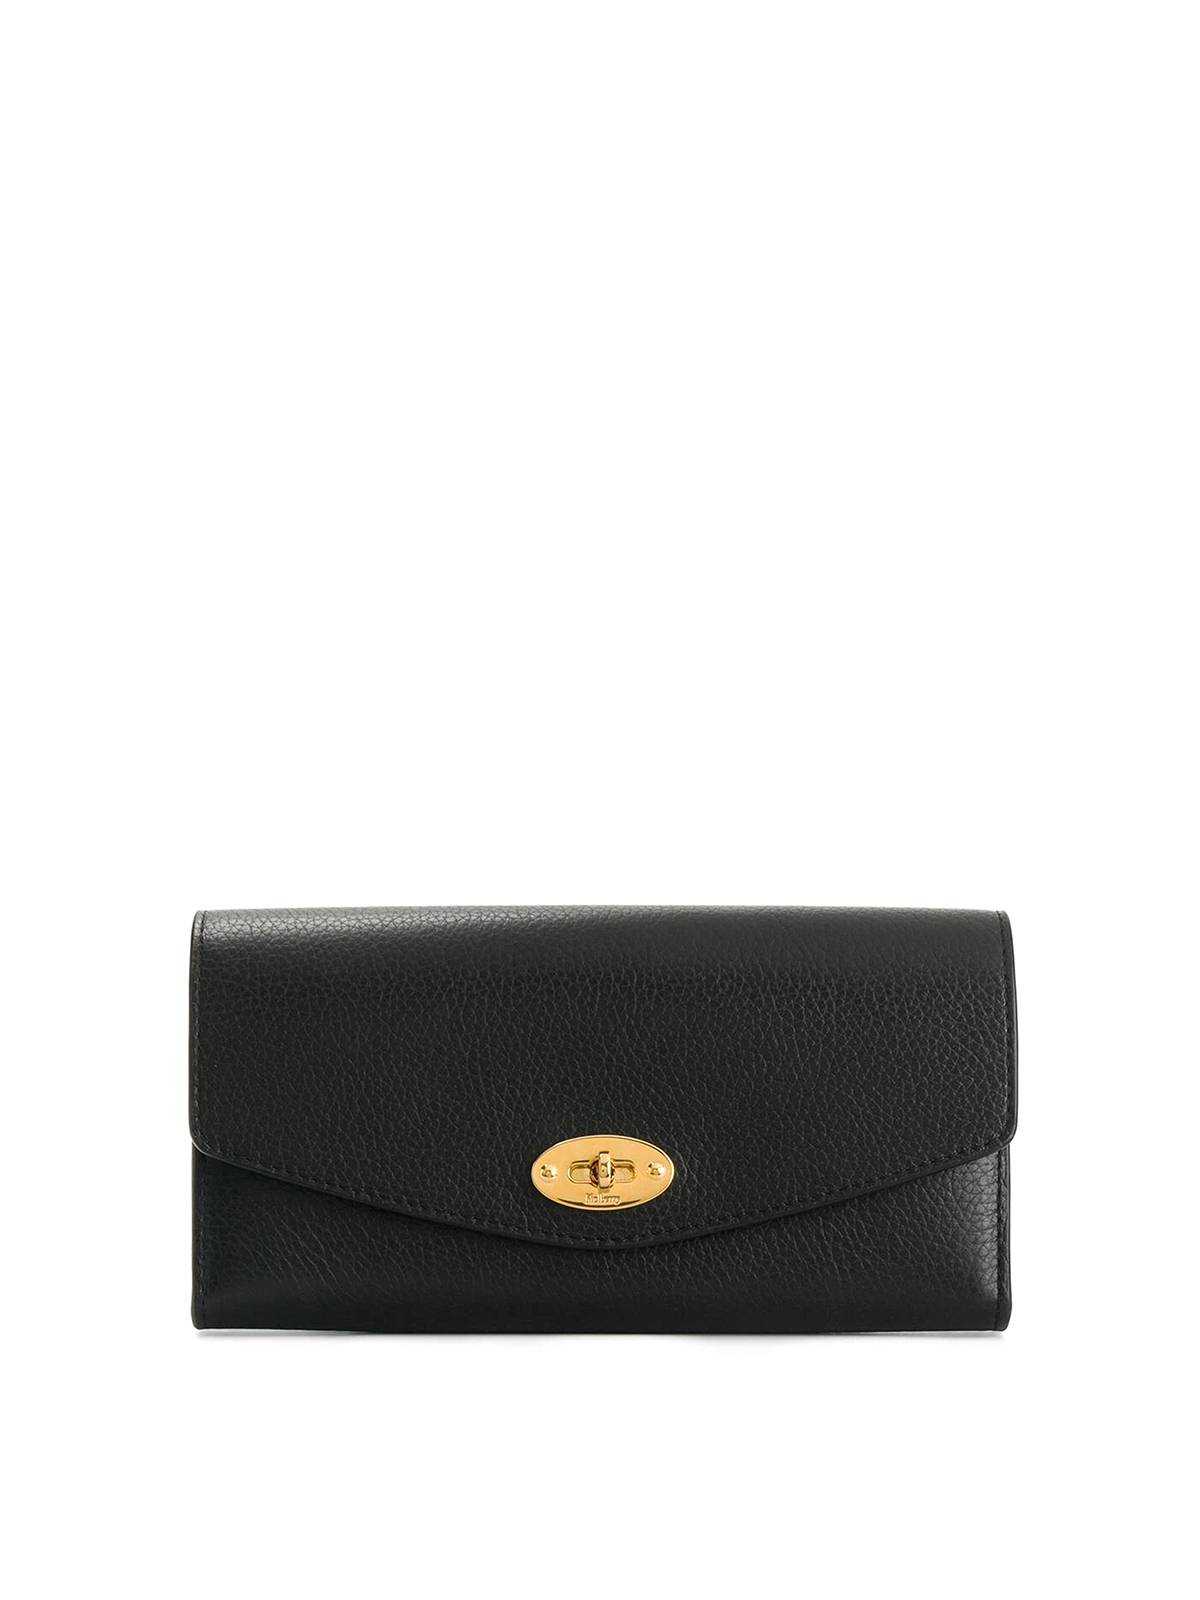 Mulberry Darley Wallet Small In Black